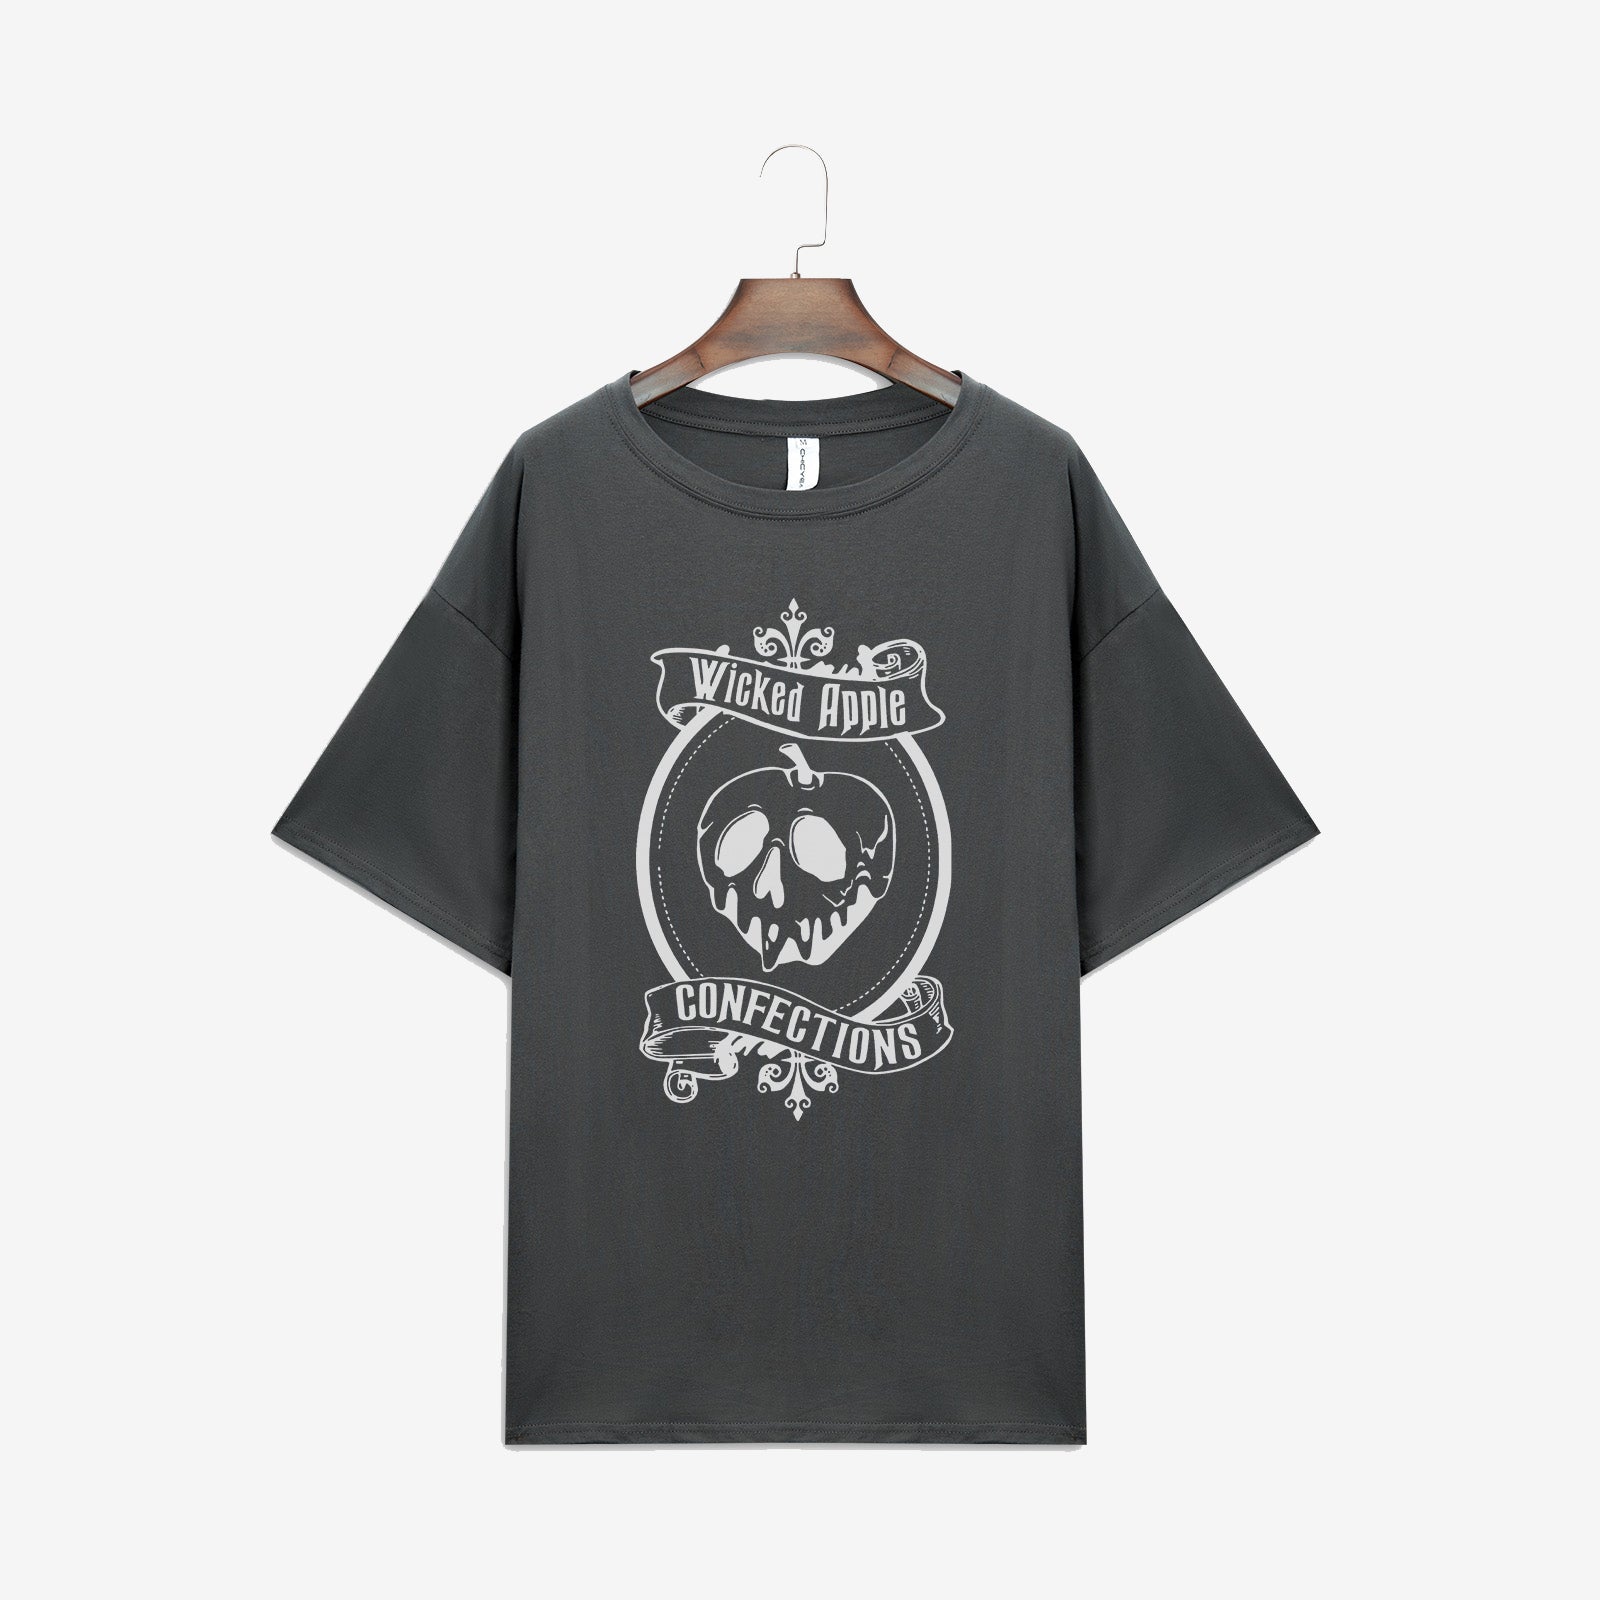 Minnieskull Cool Wicked Apple Confections Skull T-Shirt - chicyea